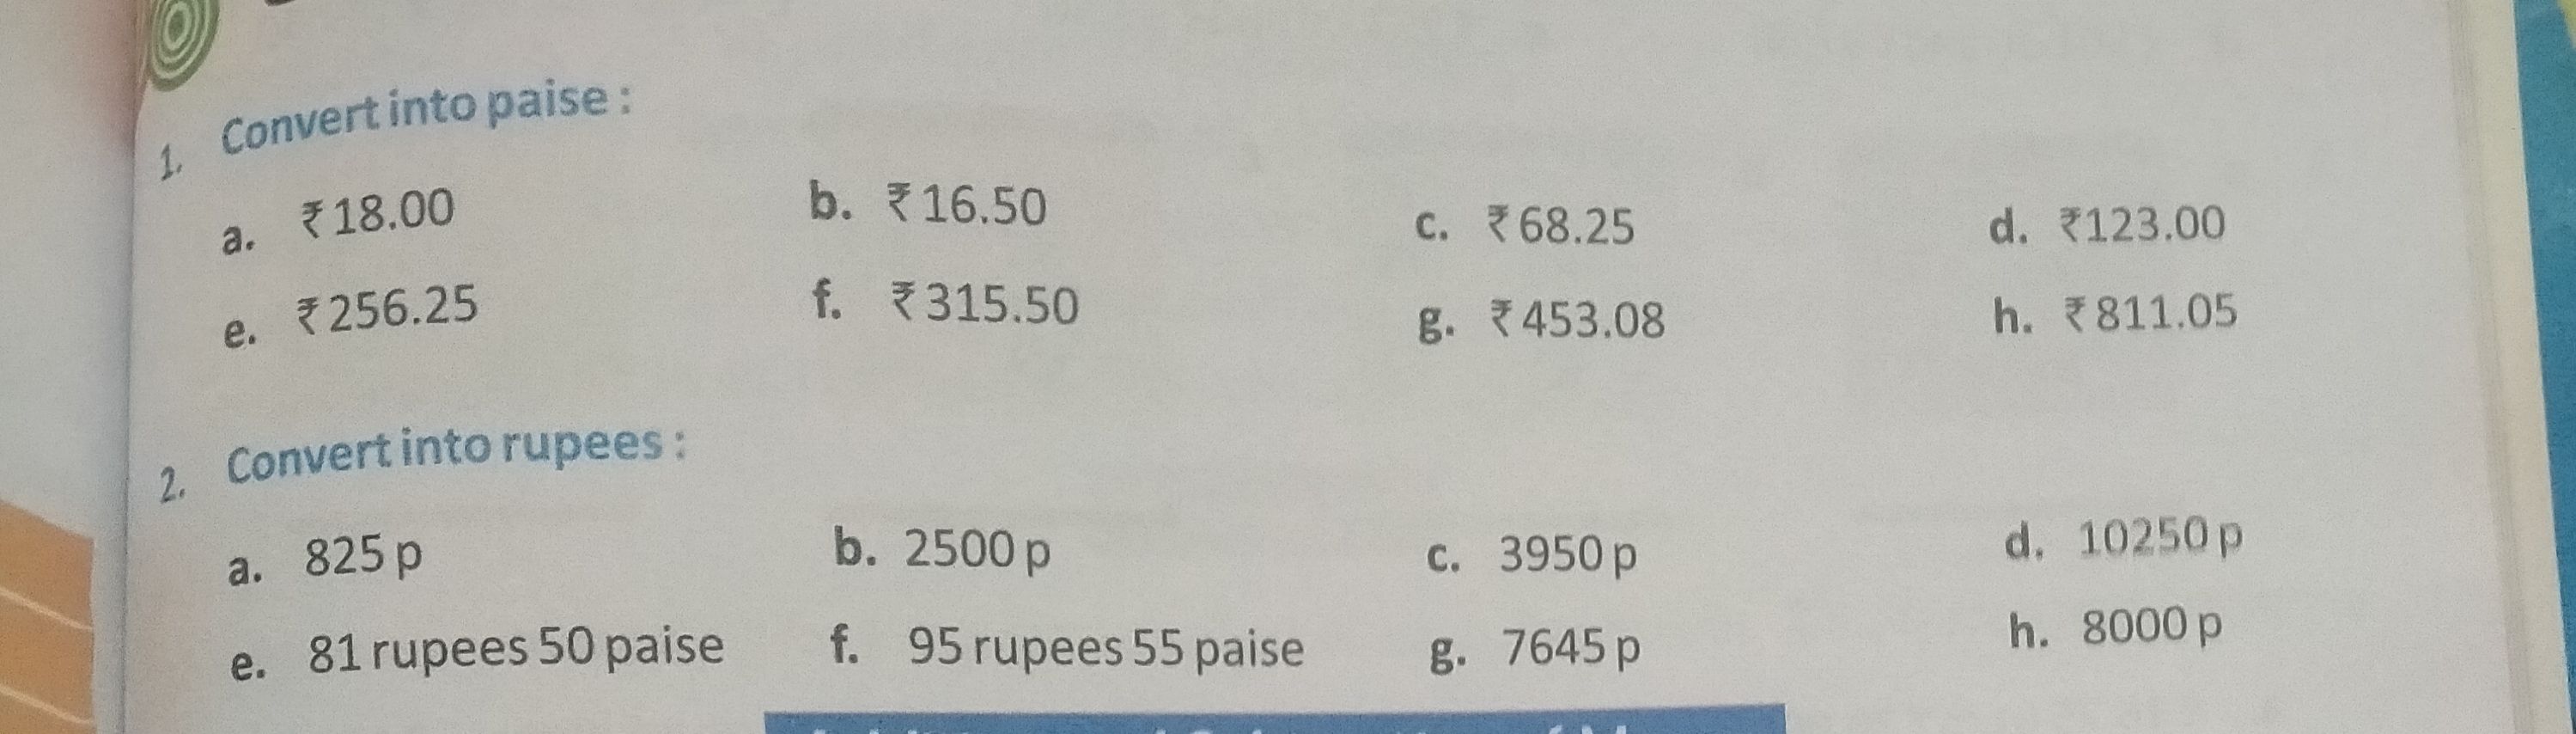 Convert Into Paise And Convert Into Rupees - Maths - Assignment - Teachmint convert indian rupees to usd